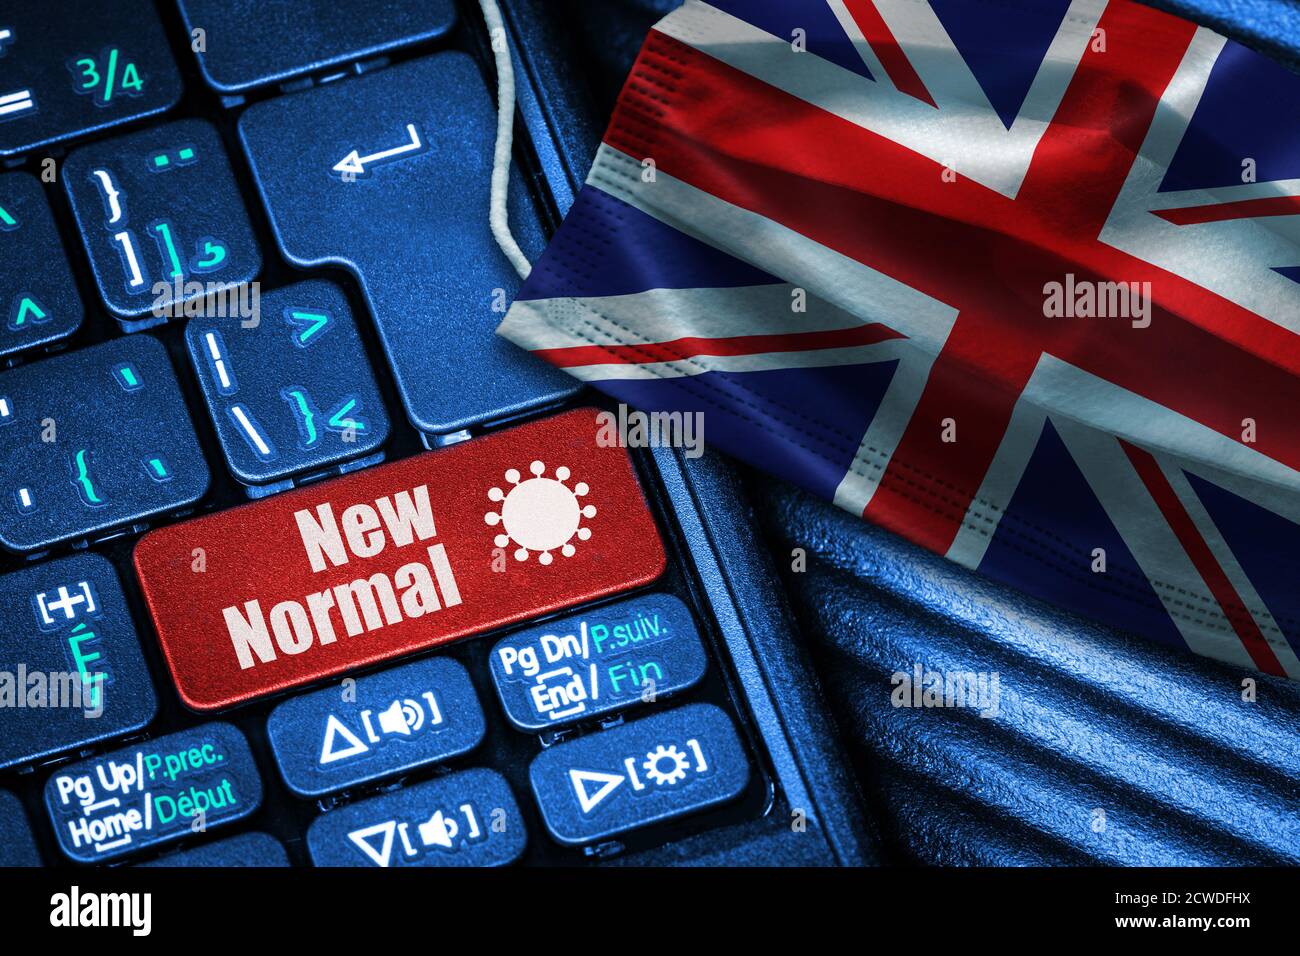 Concept of New Normal in United Kingdom during Covid-19 with computer keyboard red button text and face mask showing UK Flag. Stock Photo